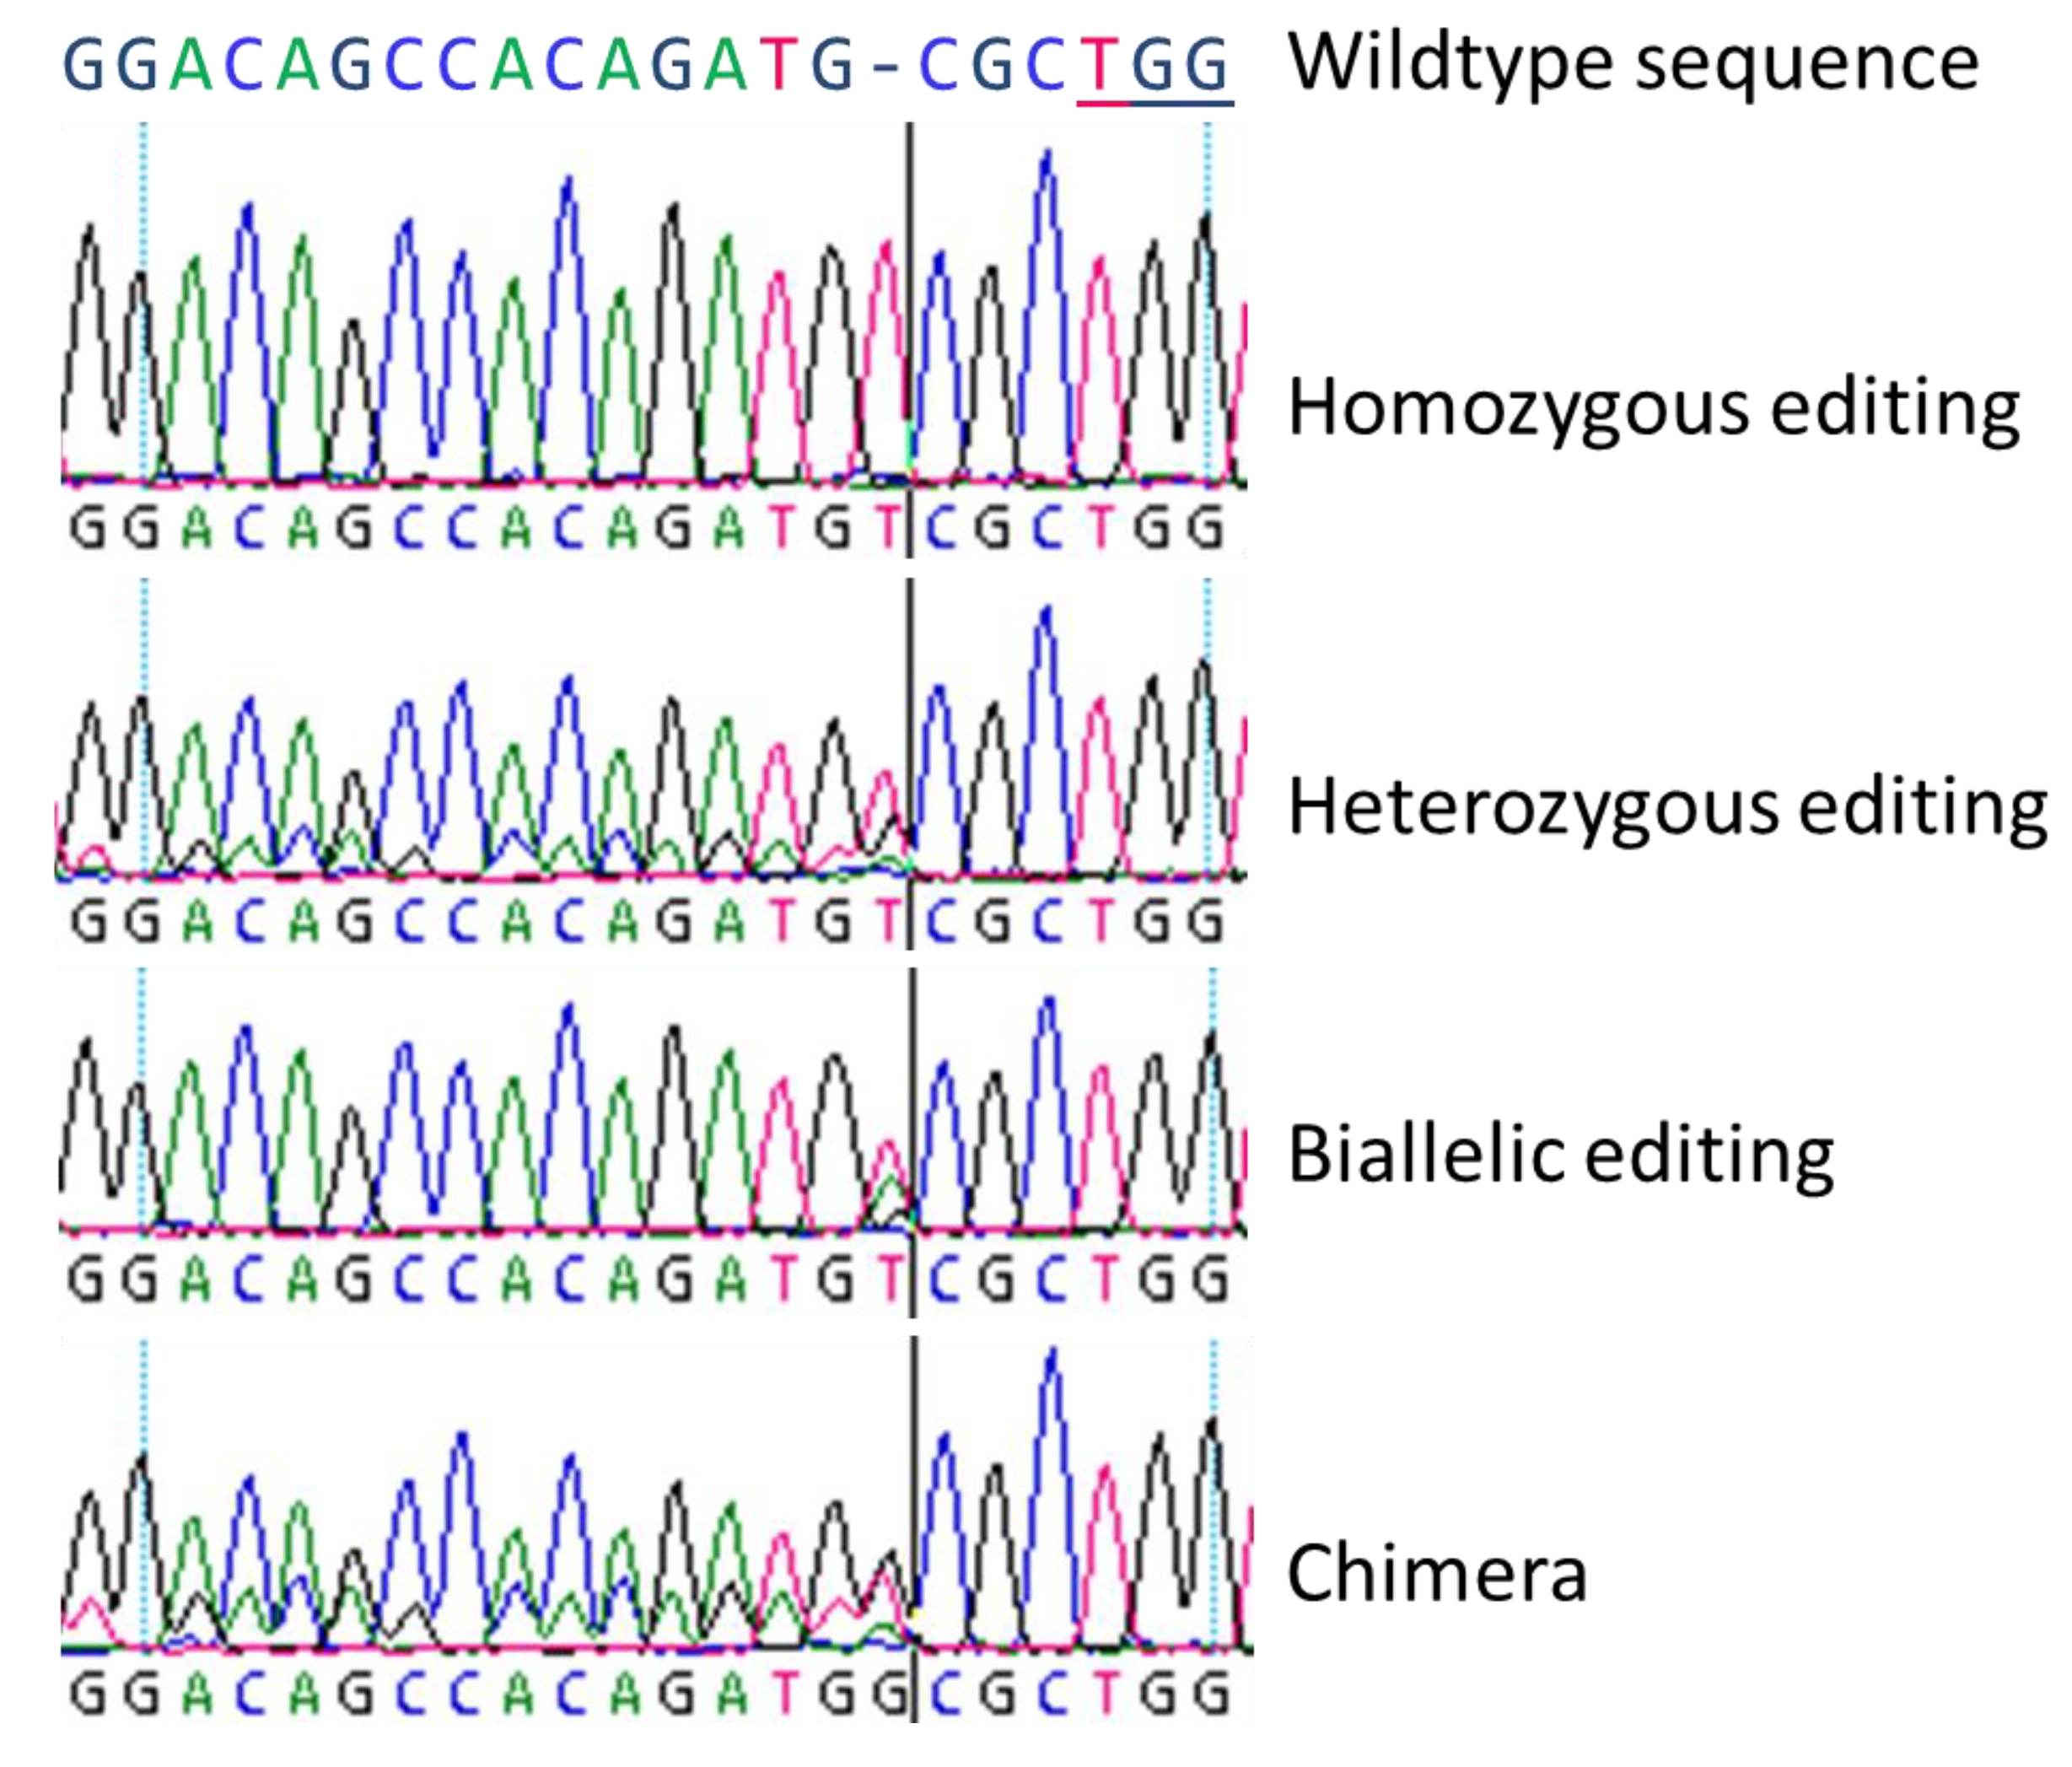 Ijms Free Full Text Evaluating The Efficiency Of Grnas In Crispr Cas9 Mediated Genome Editing In Poplars Html